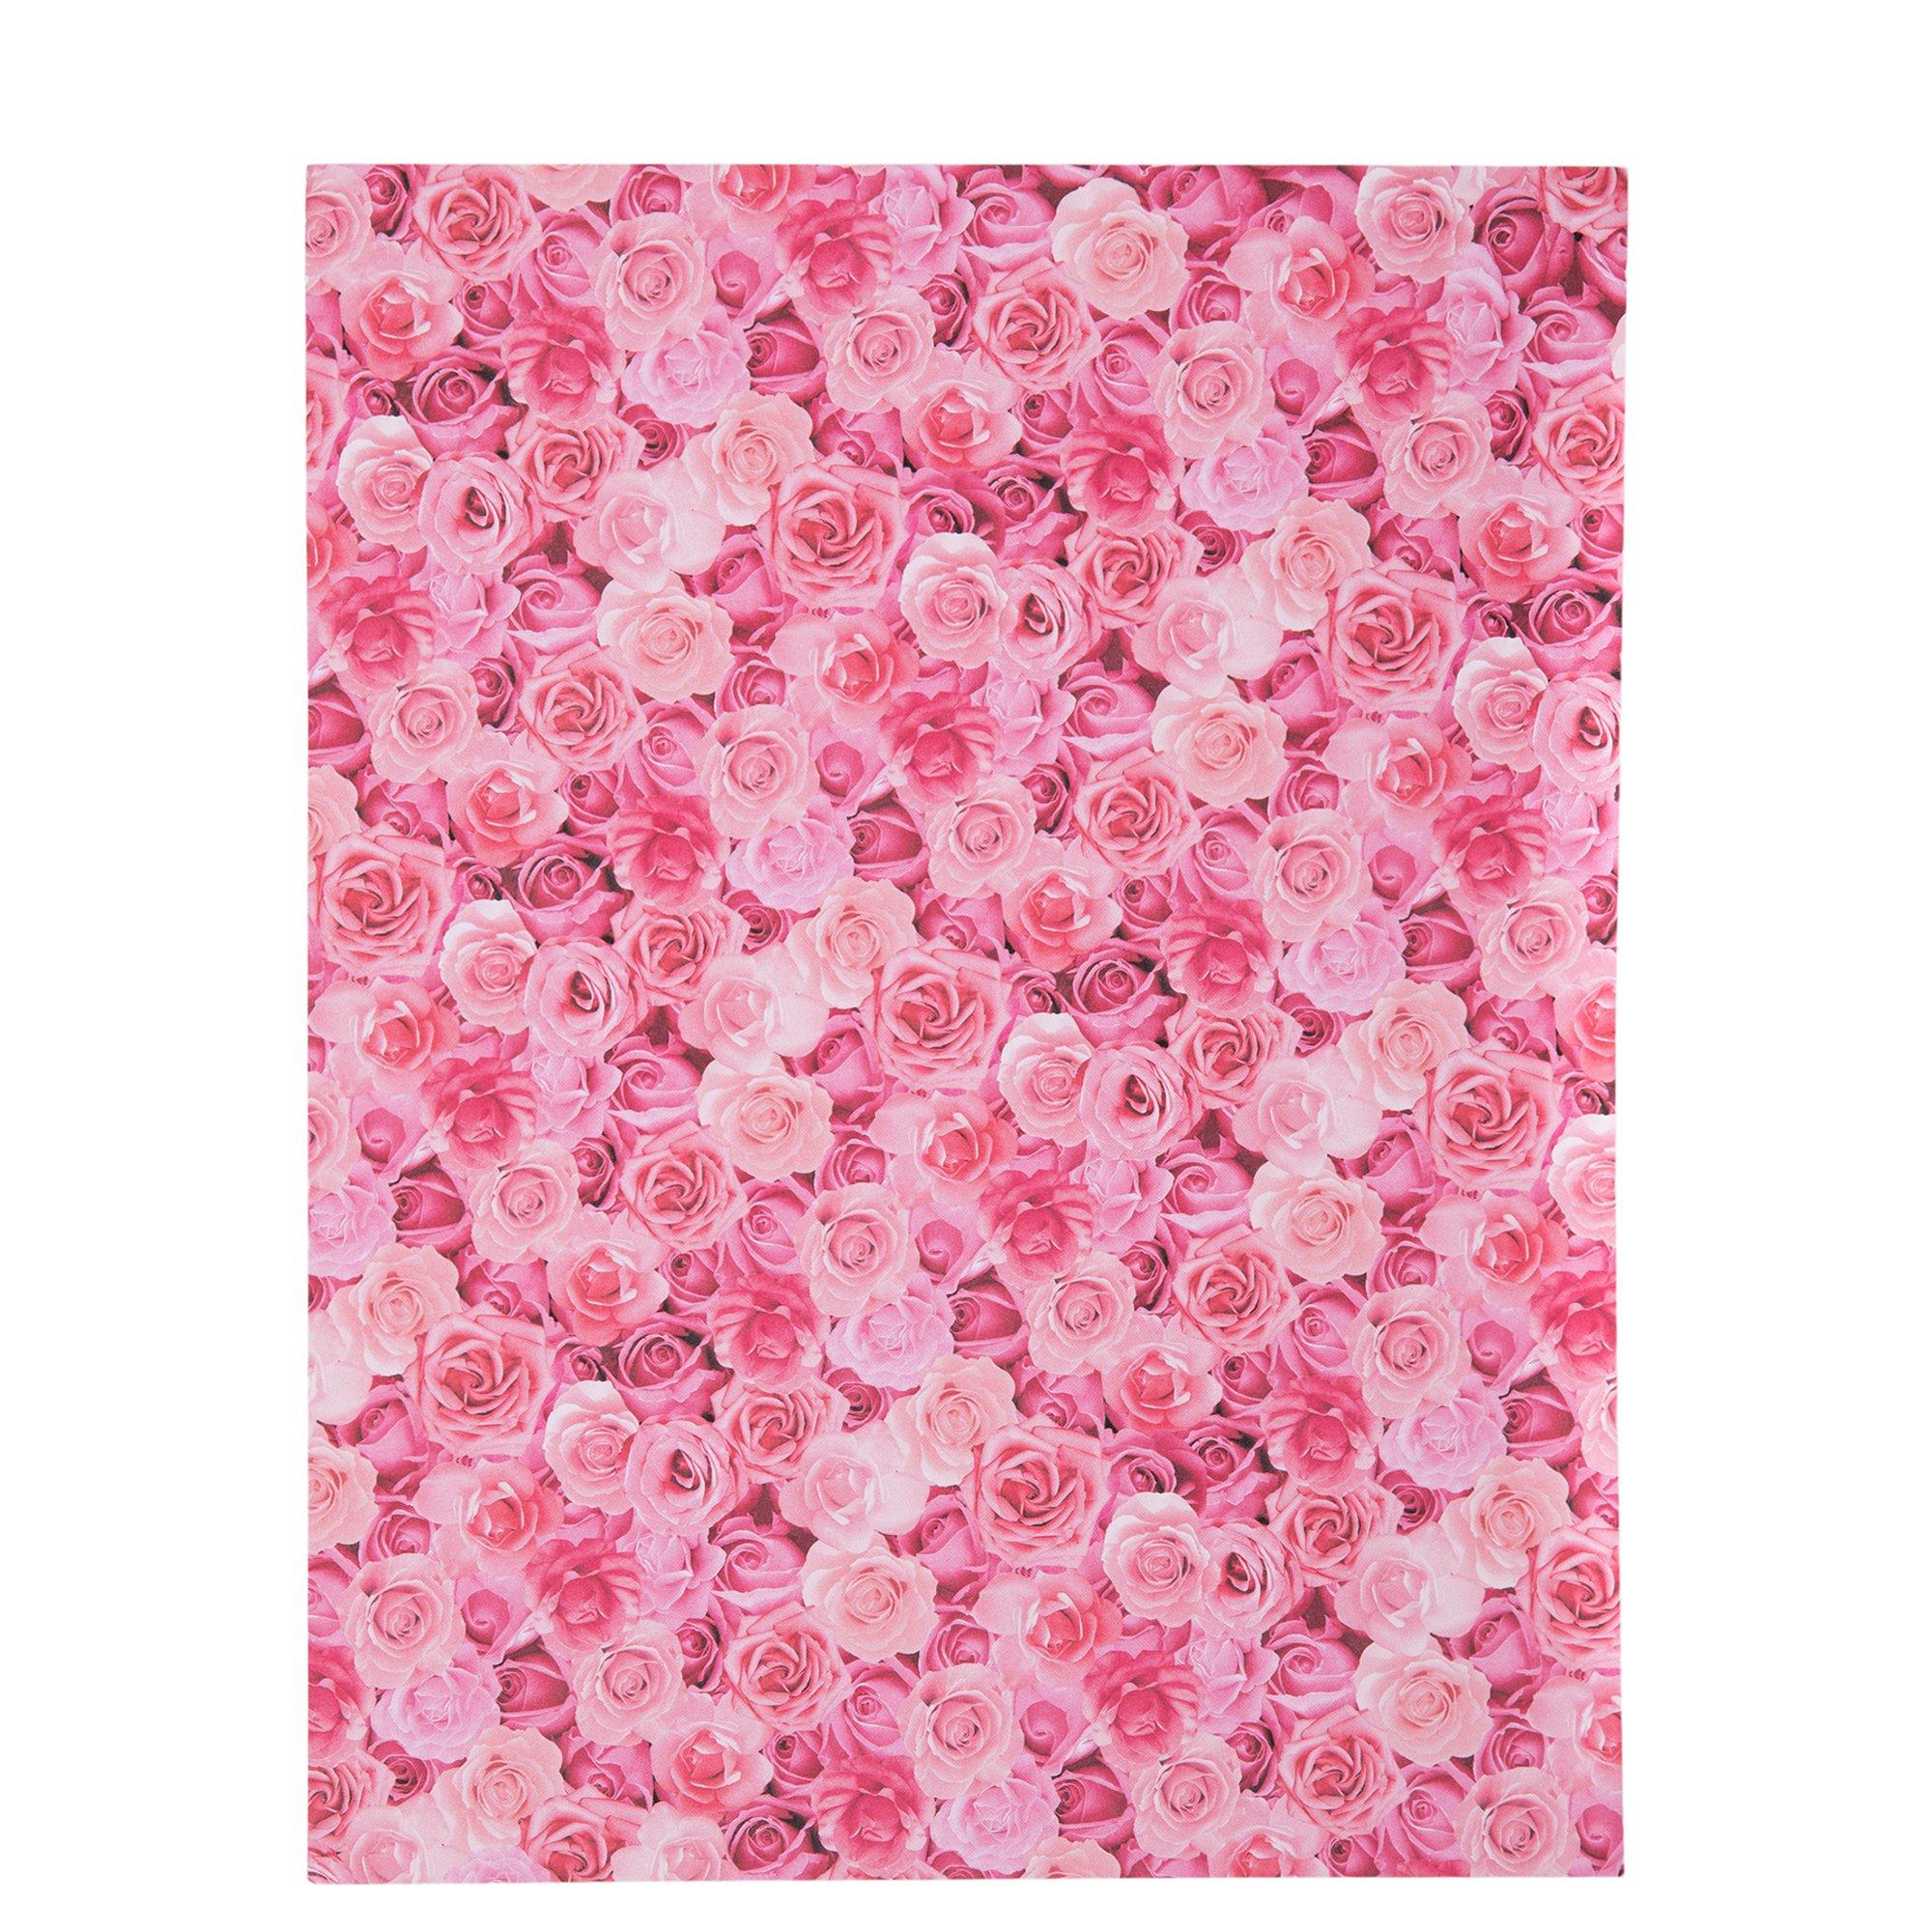 LUXPaper 8.5” x 11” Cardstock for Crafts and Cards in 100 lb. Candy Pink, Scrapbook Supplies, 50 Pack (Pink)